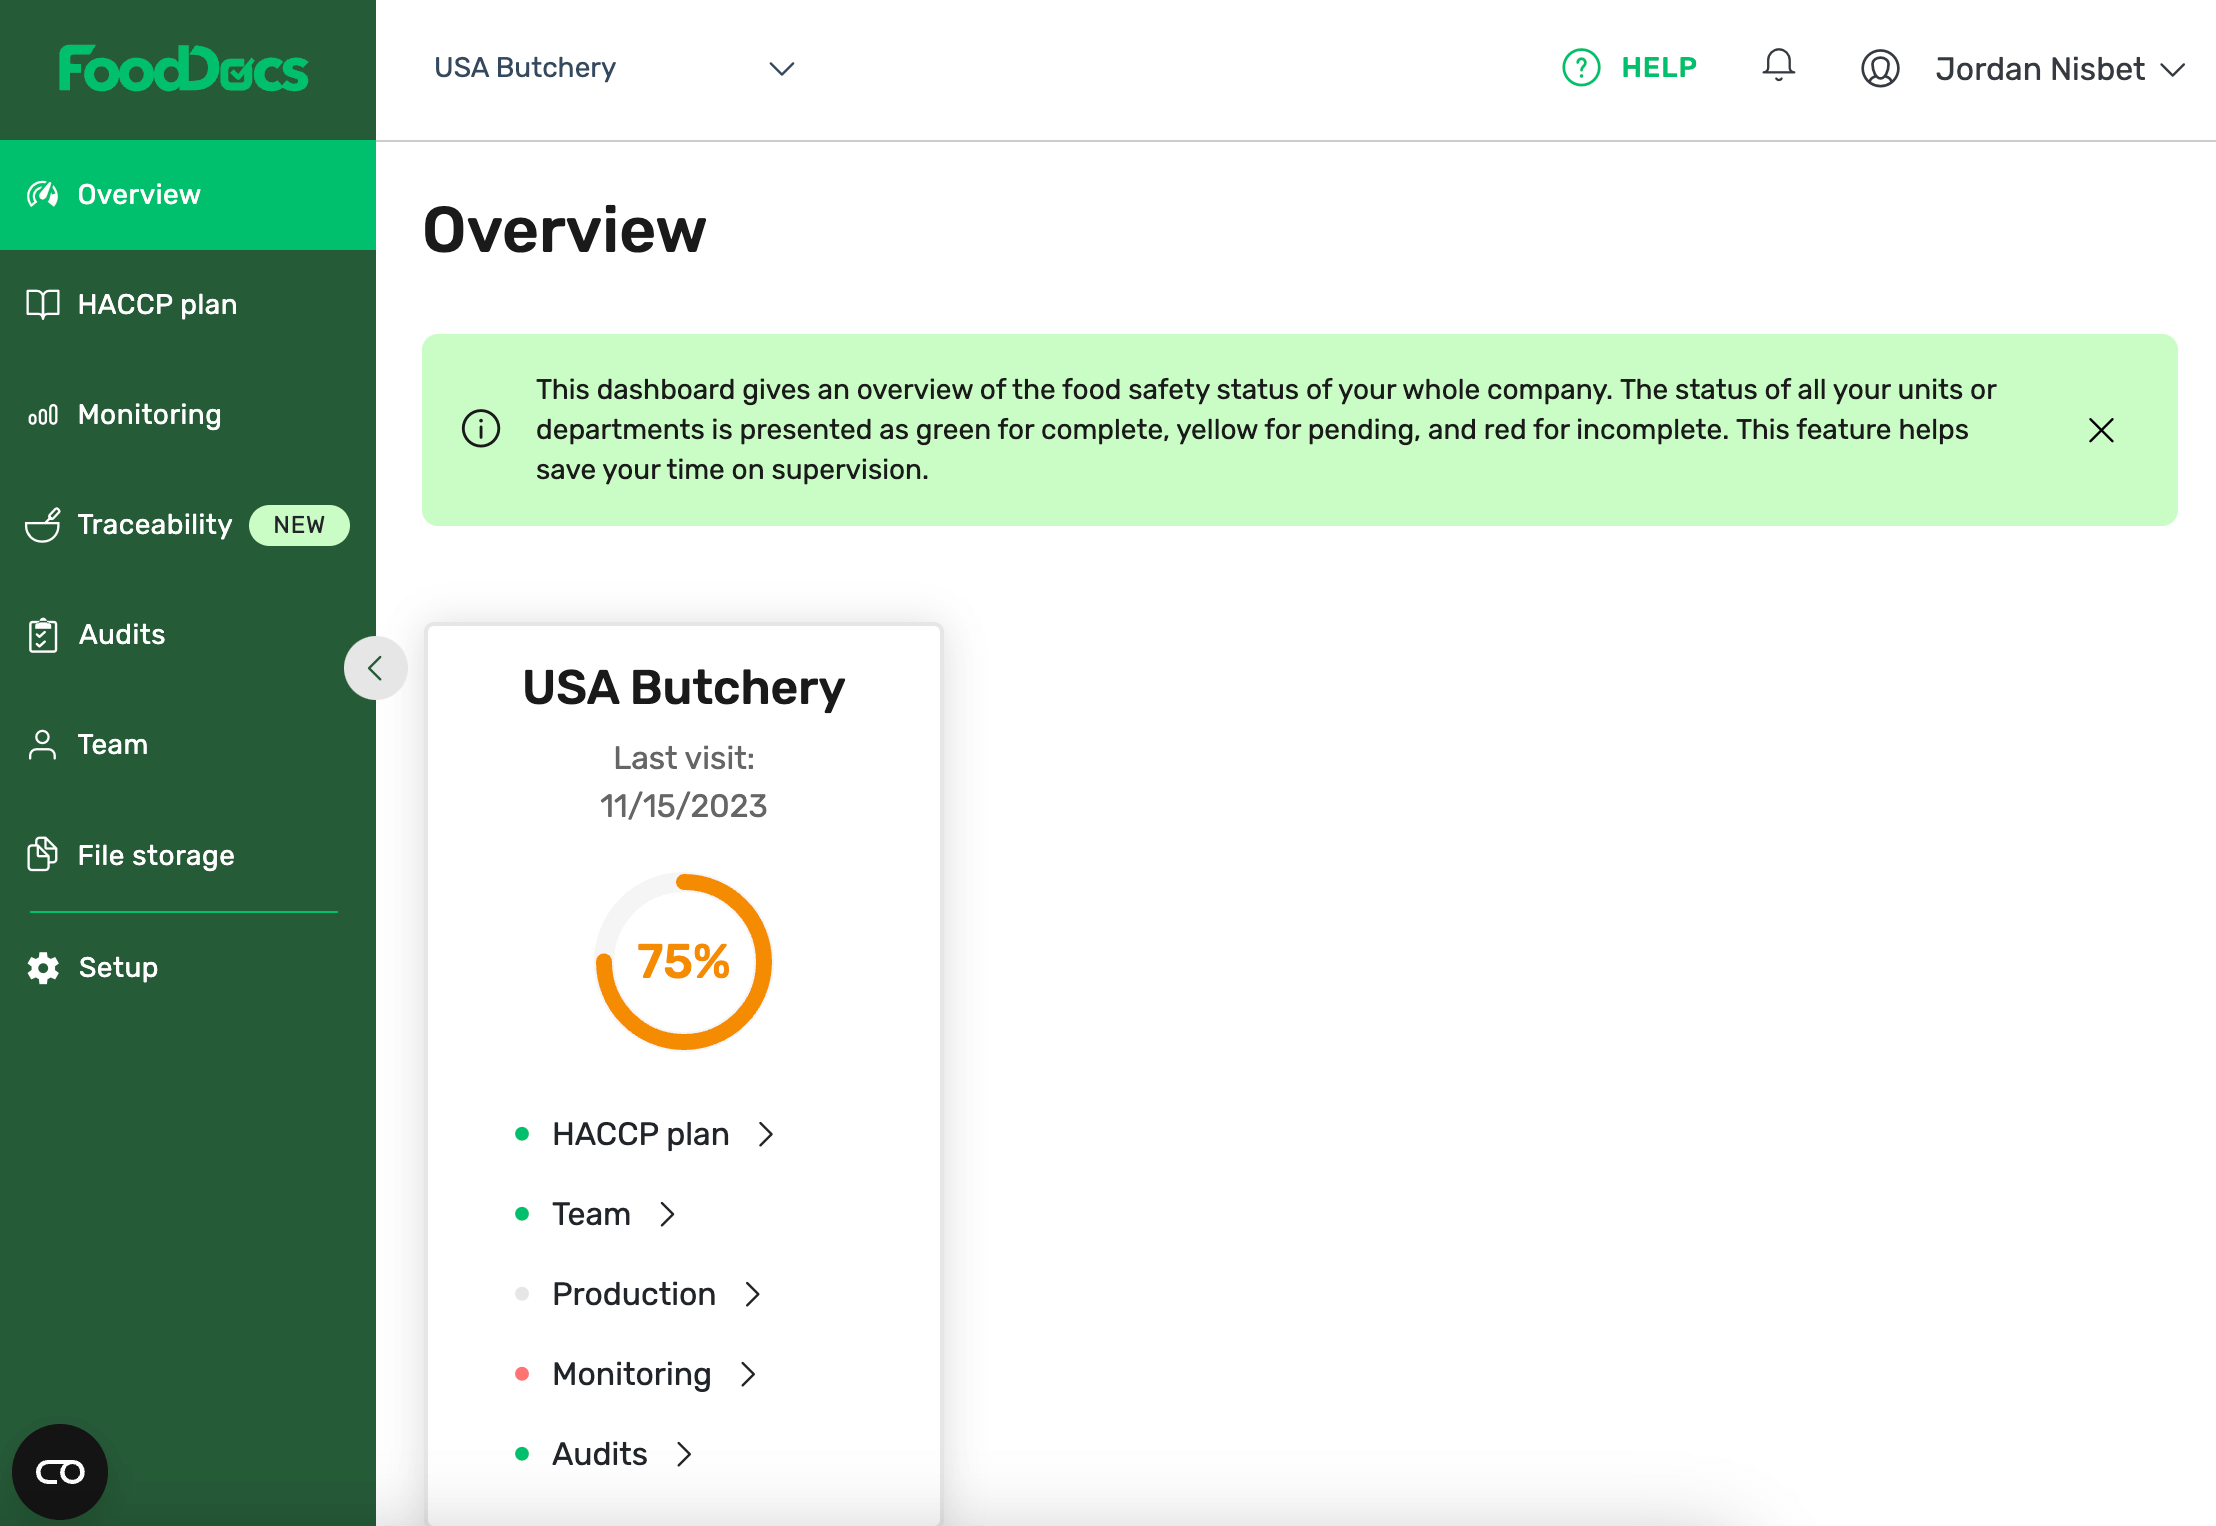 Preview of the FoodDocs food safety Overview feature using a USA Butchery as an example.